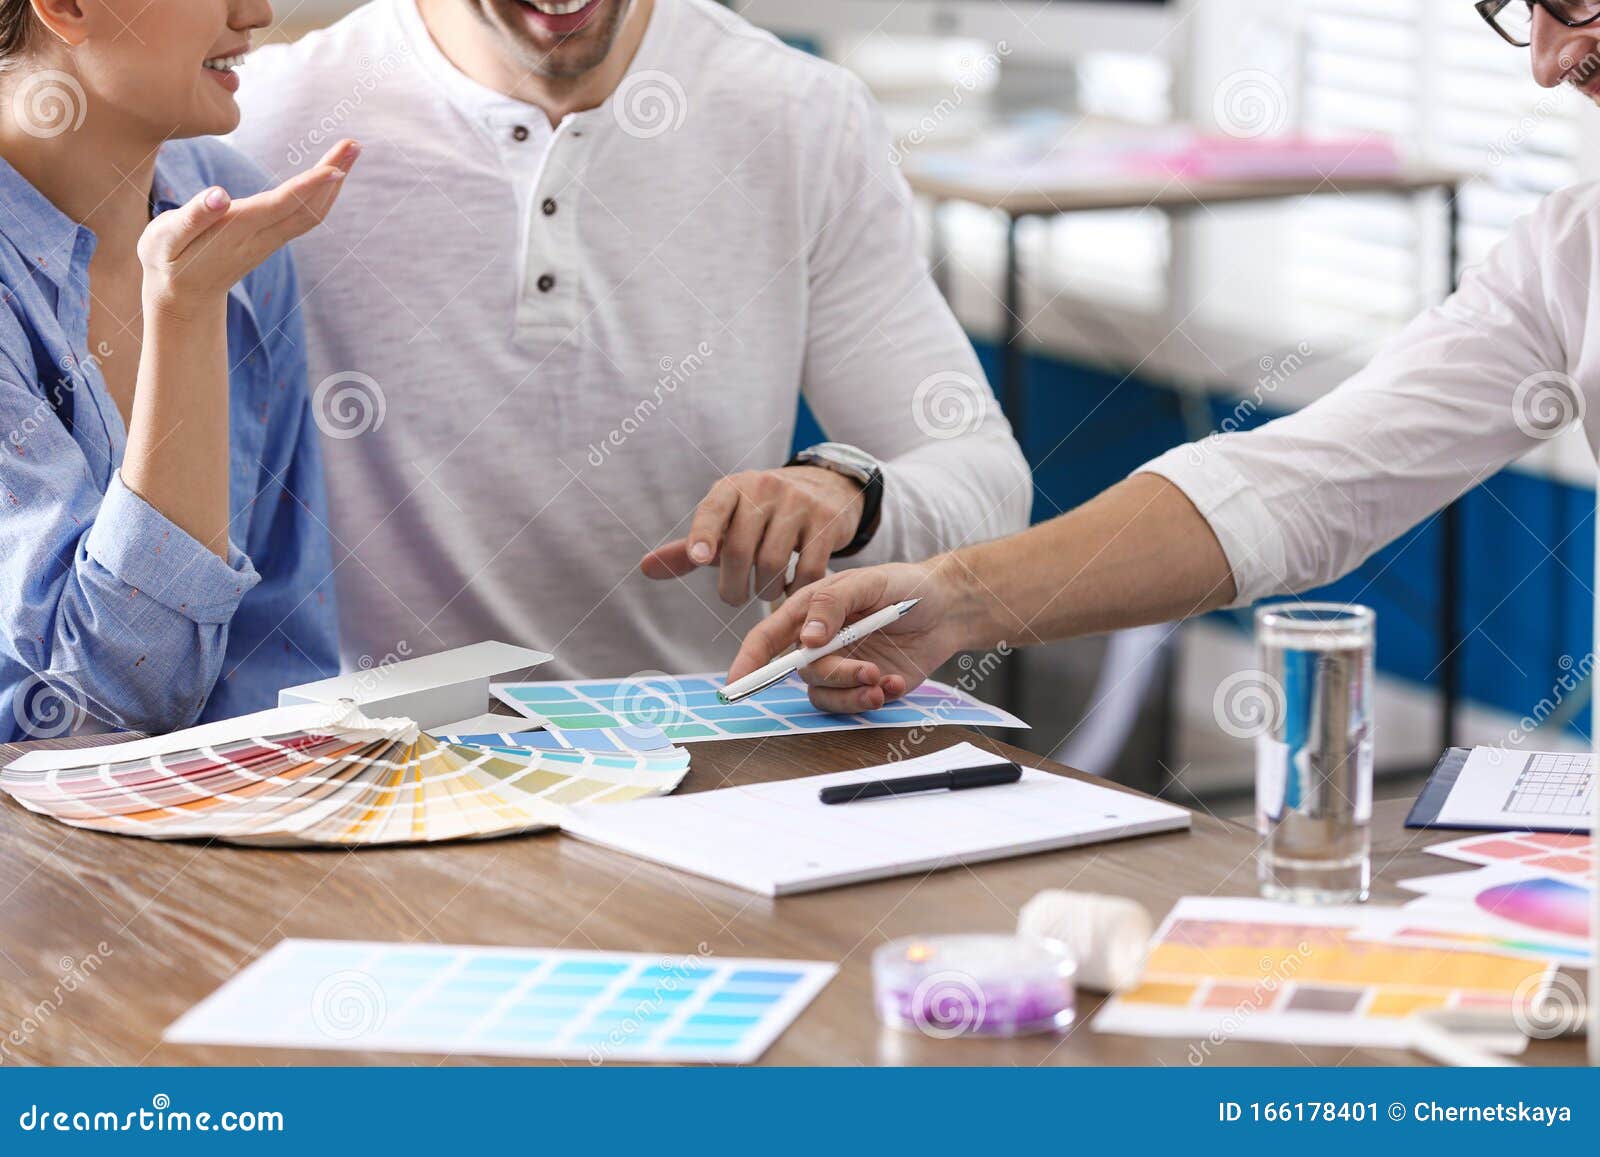 Interior Designer Consulting Young Couple In Office Stock Image Image